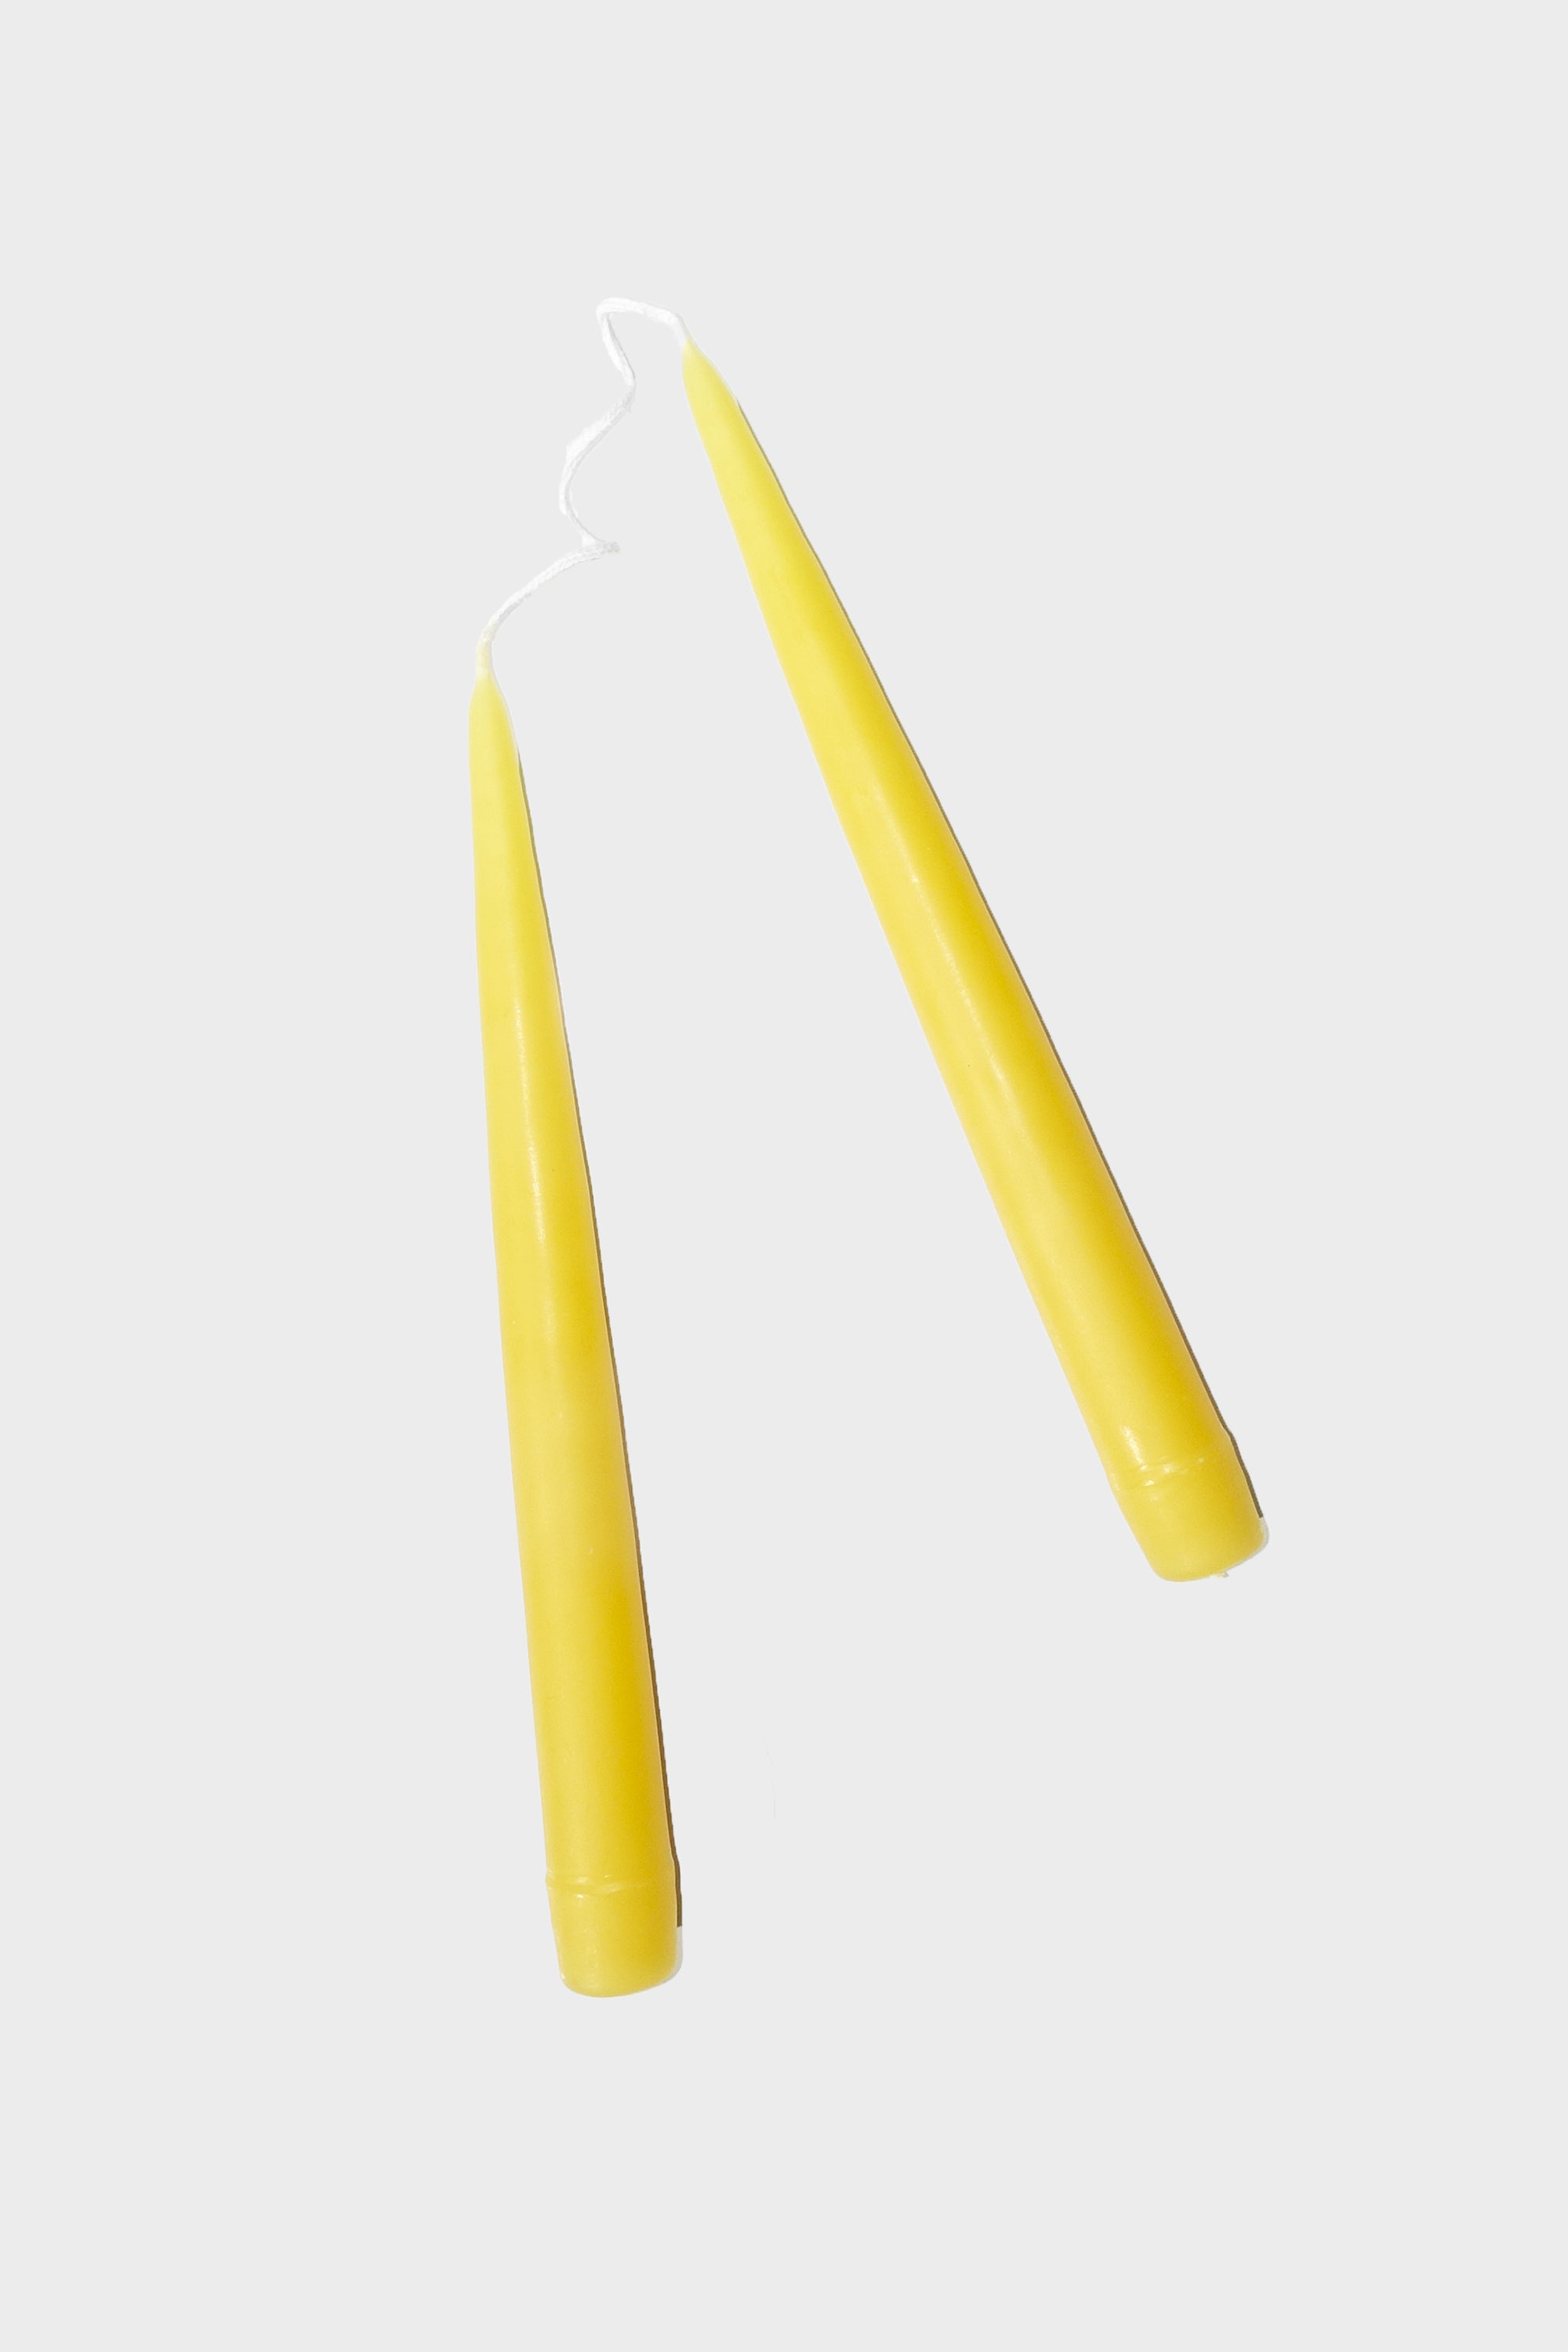 09" Taper Candles in Maize